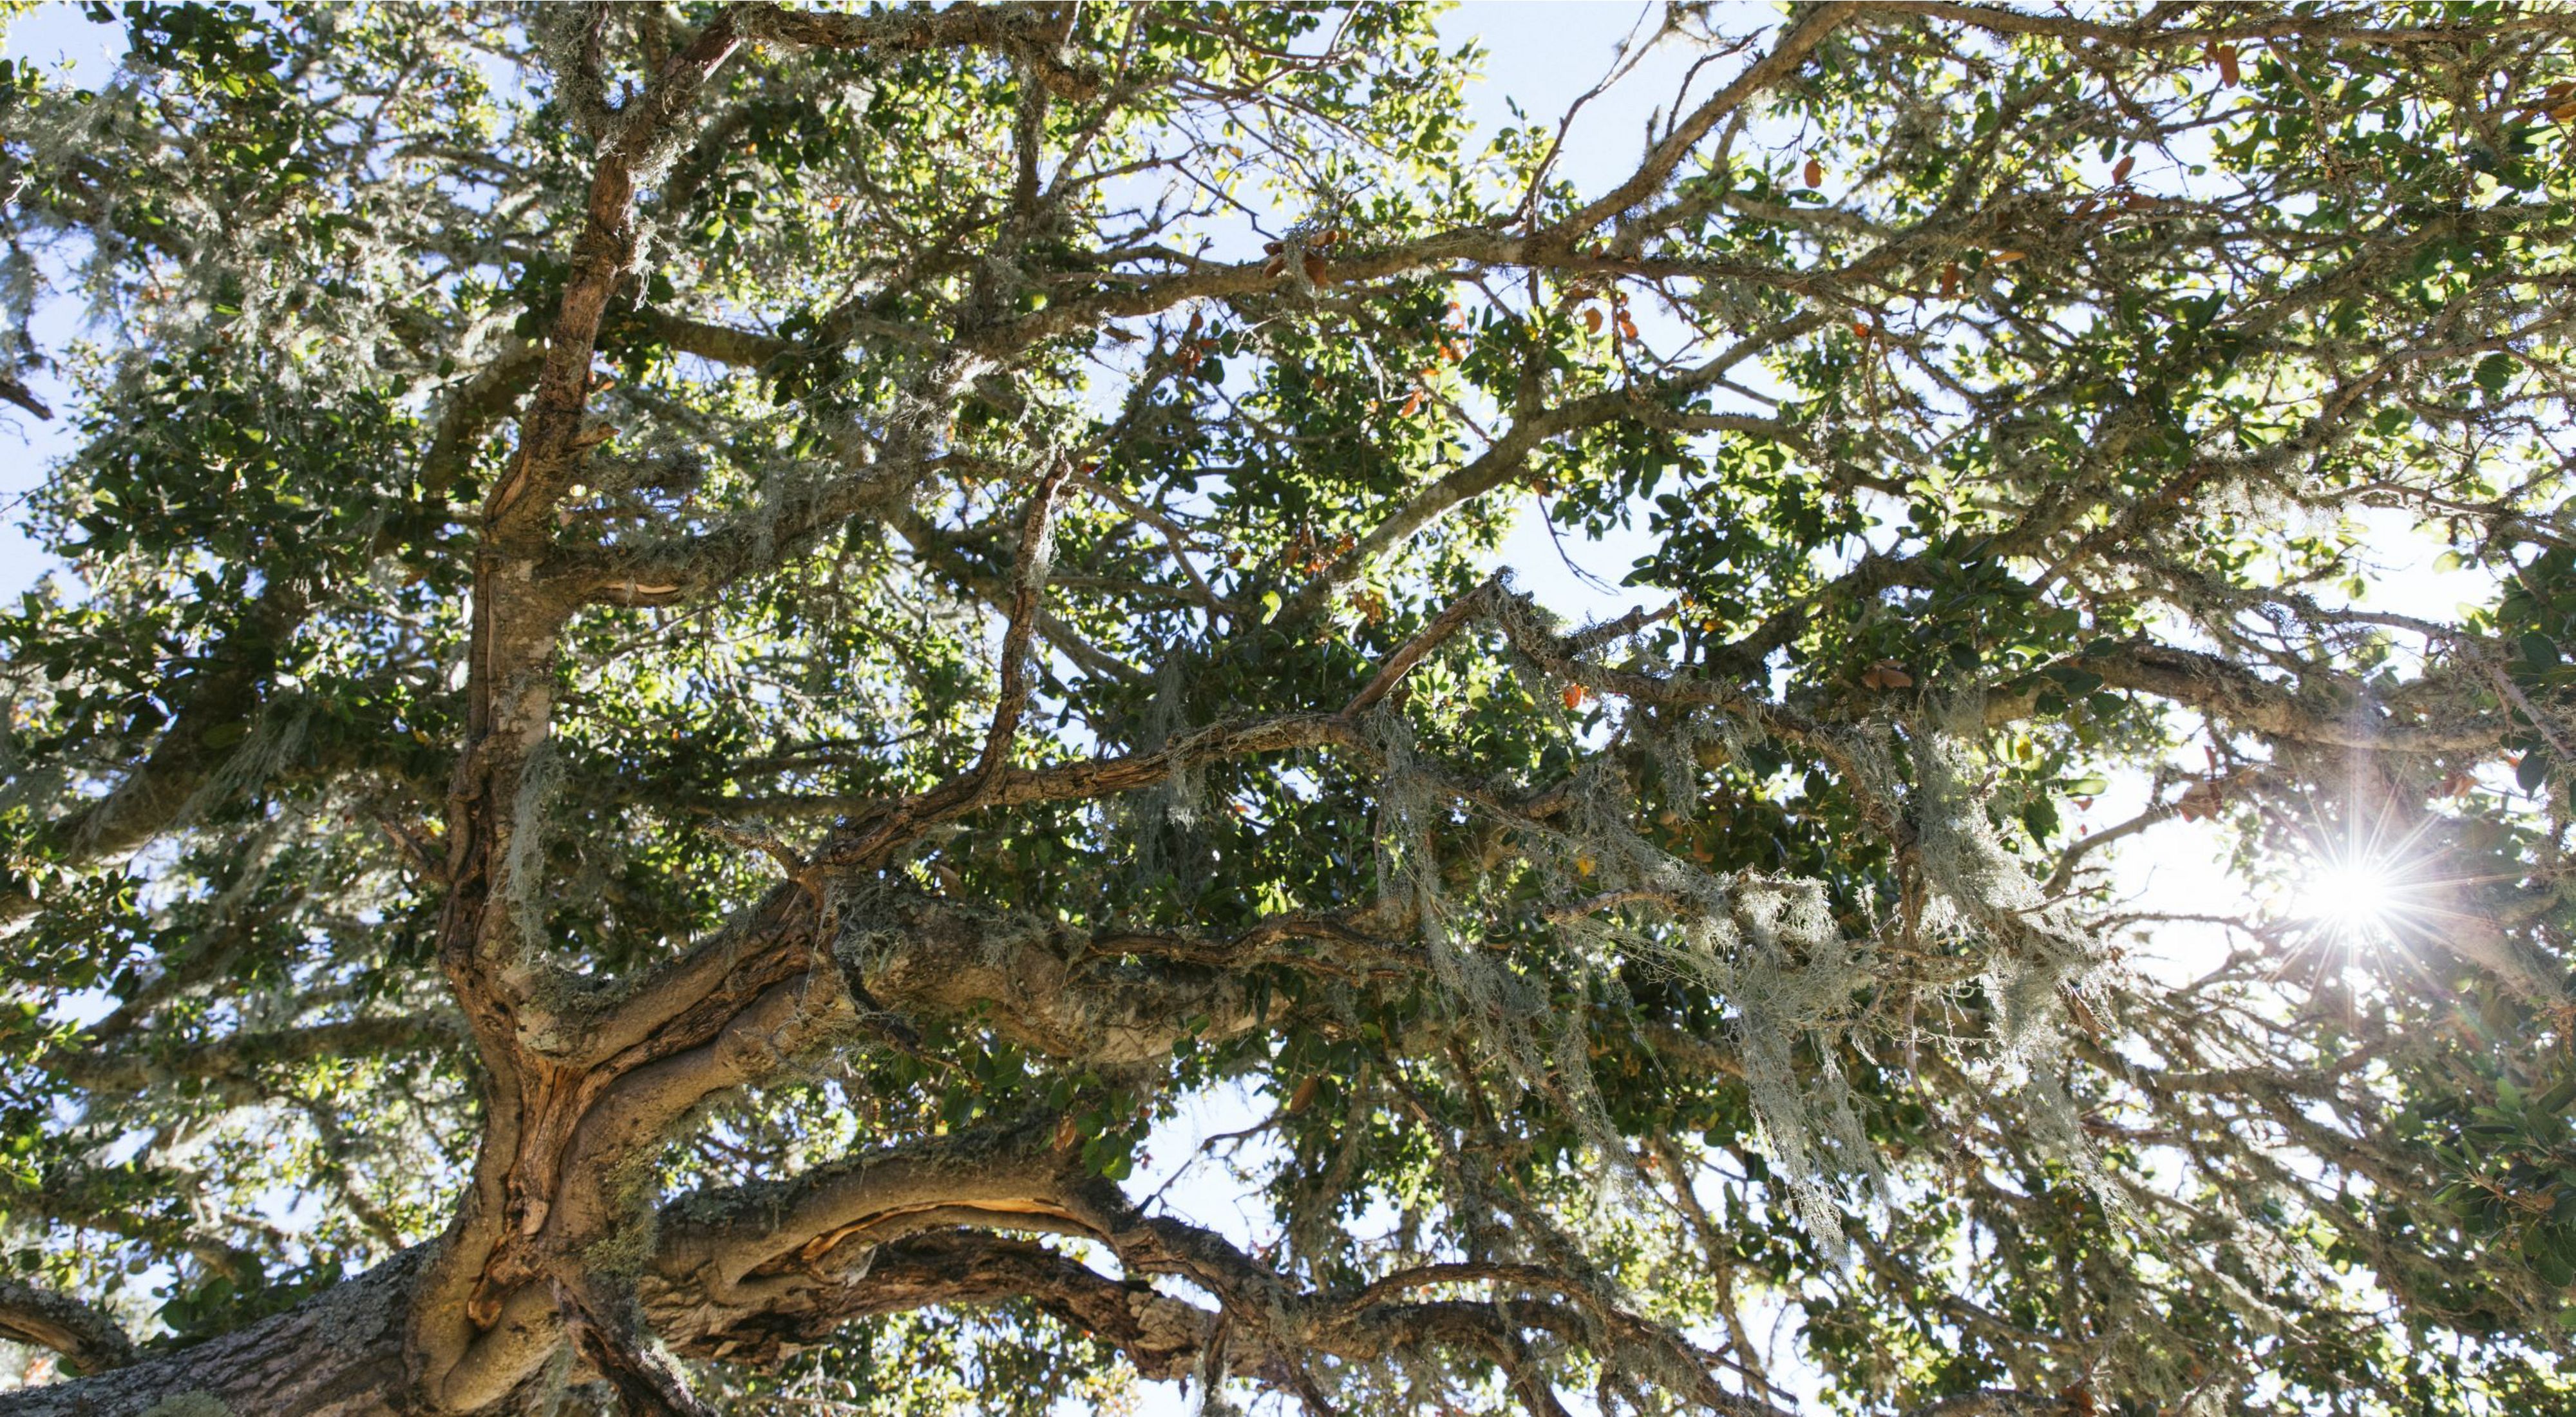 Branches of a coast live oak tree backlit by sun.